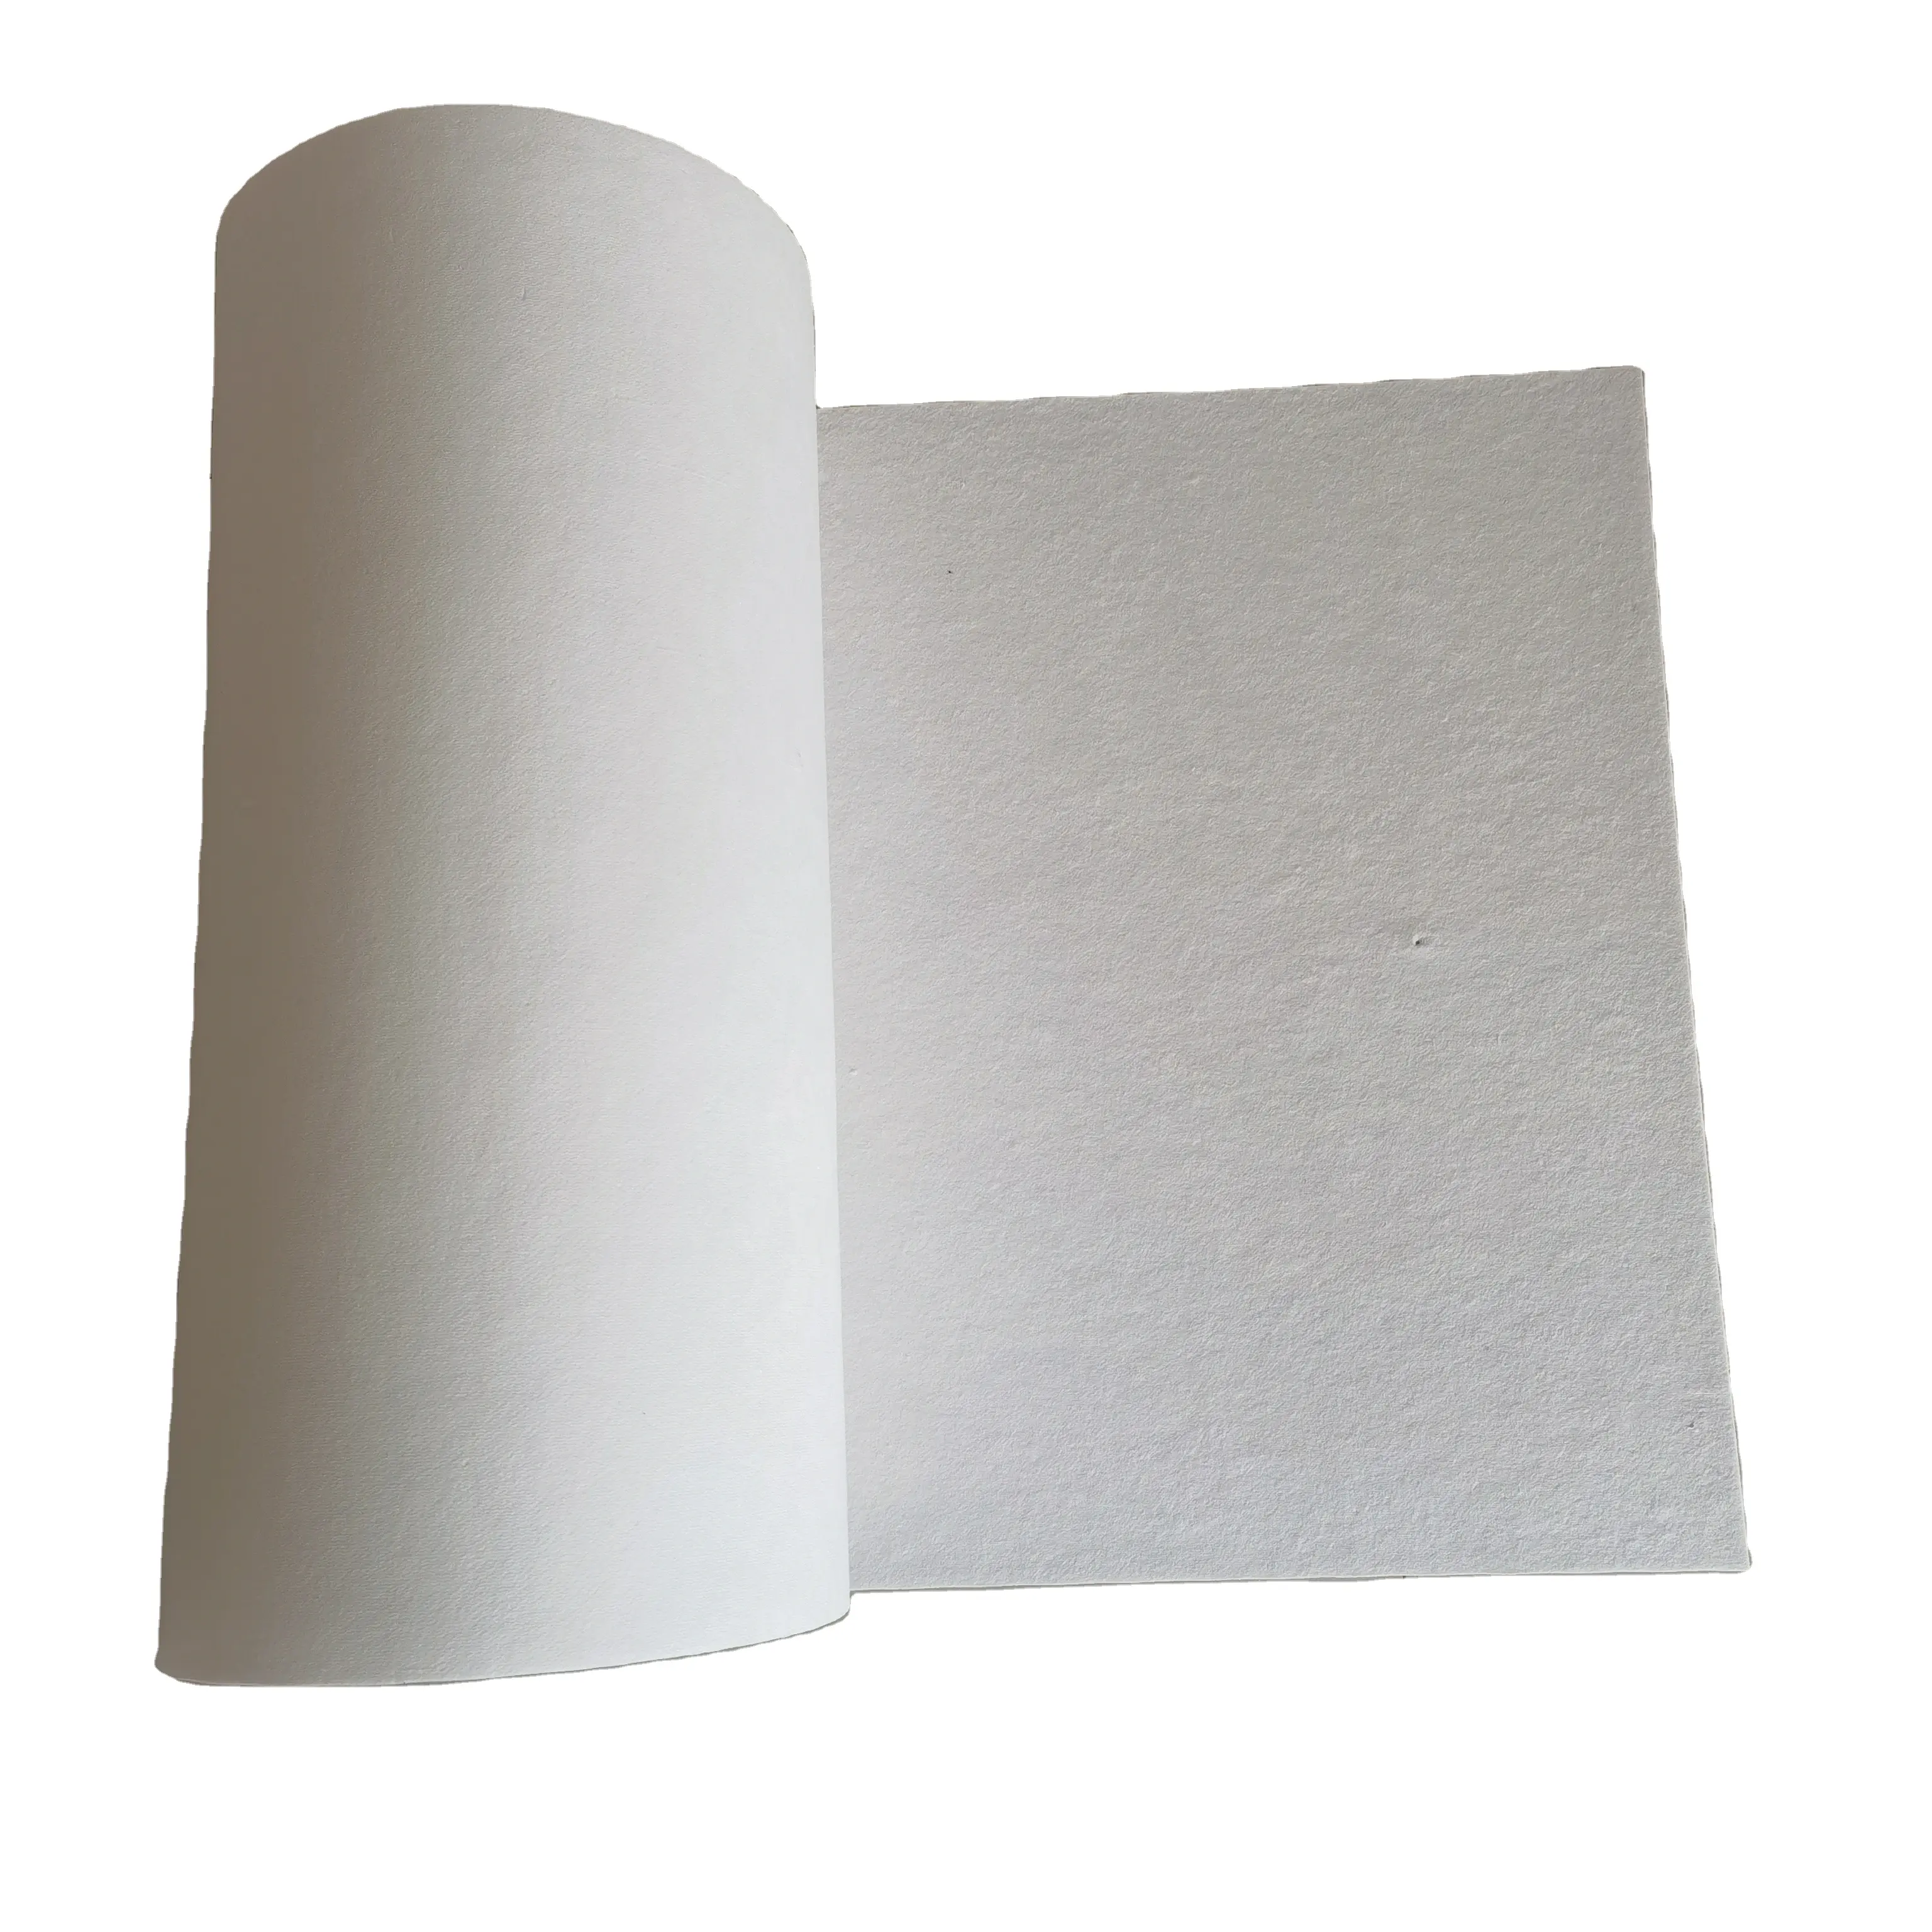 Fireproof Ceramic Fiber Paper Thickness 1*610*60000mm 1.5mm Thick 1050 Thermal Insulation 1260 For Furnace Lining Fire Proof